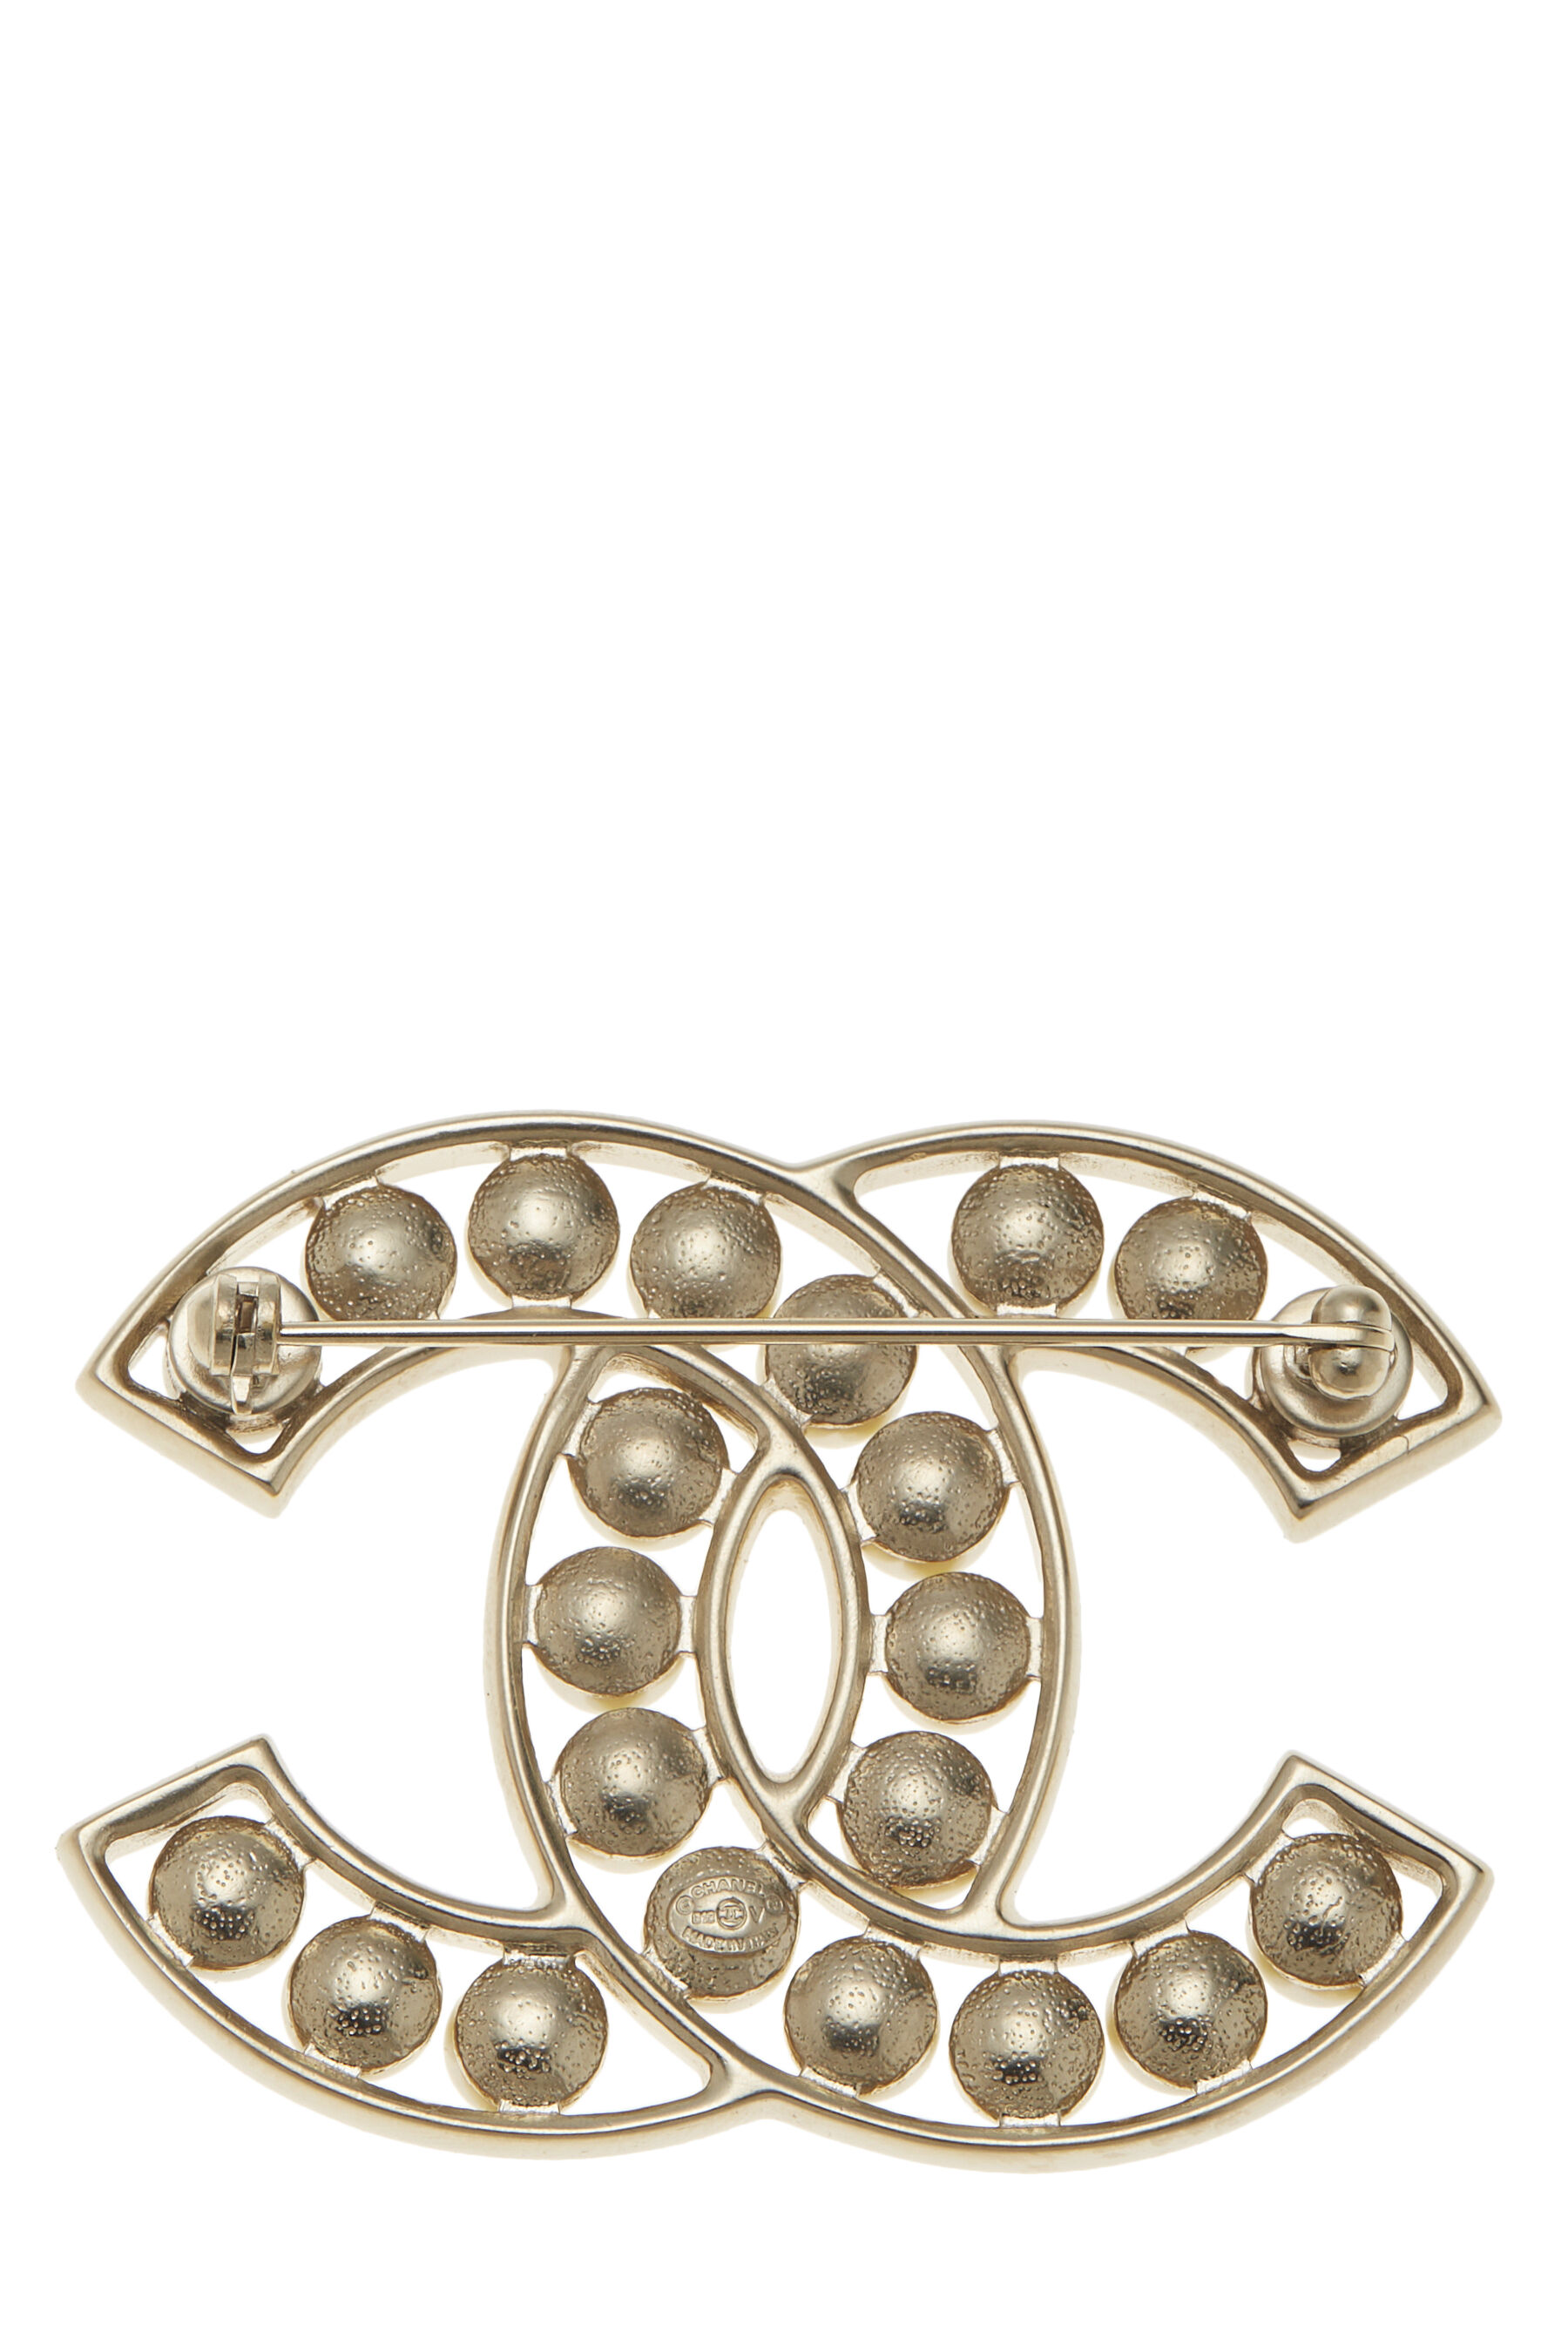 Chanel - Gold & Faux Pearl 'CC' Pin